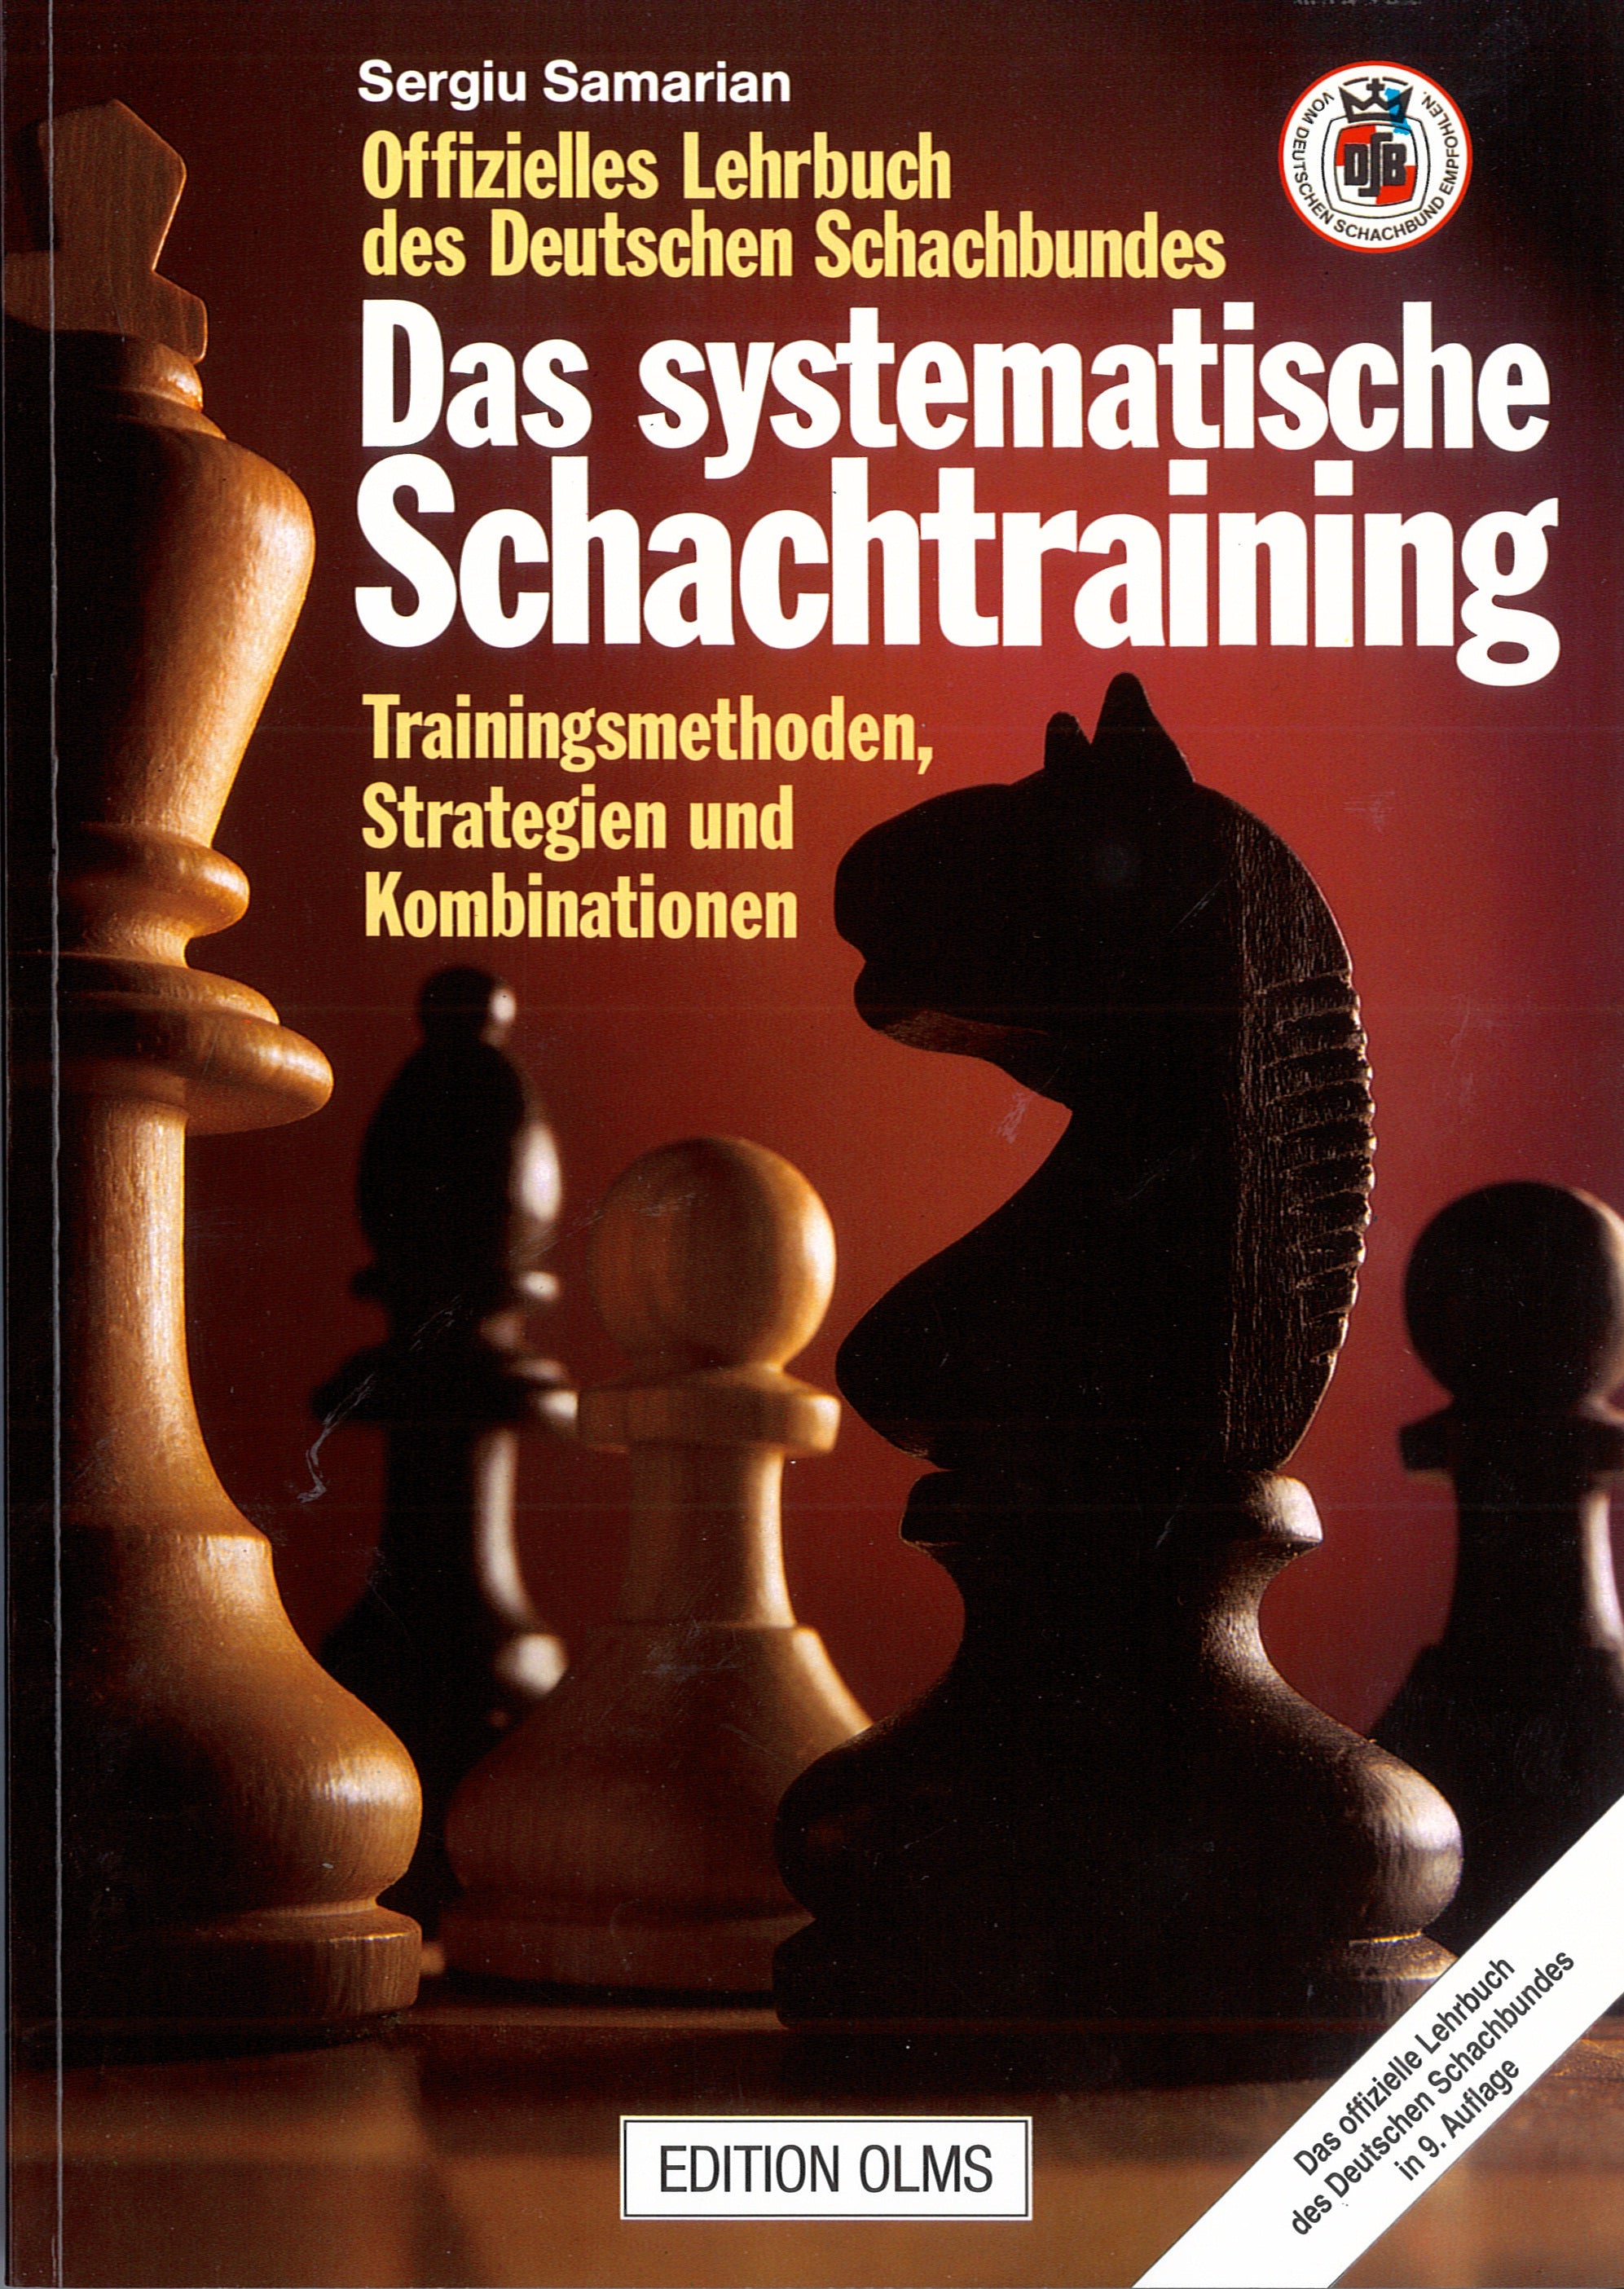 Samarian: Systematic Chess Training - Official Textbook of the German Chess Federation